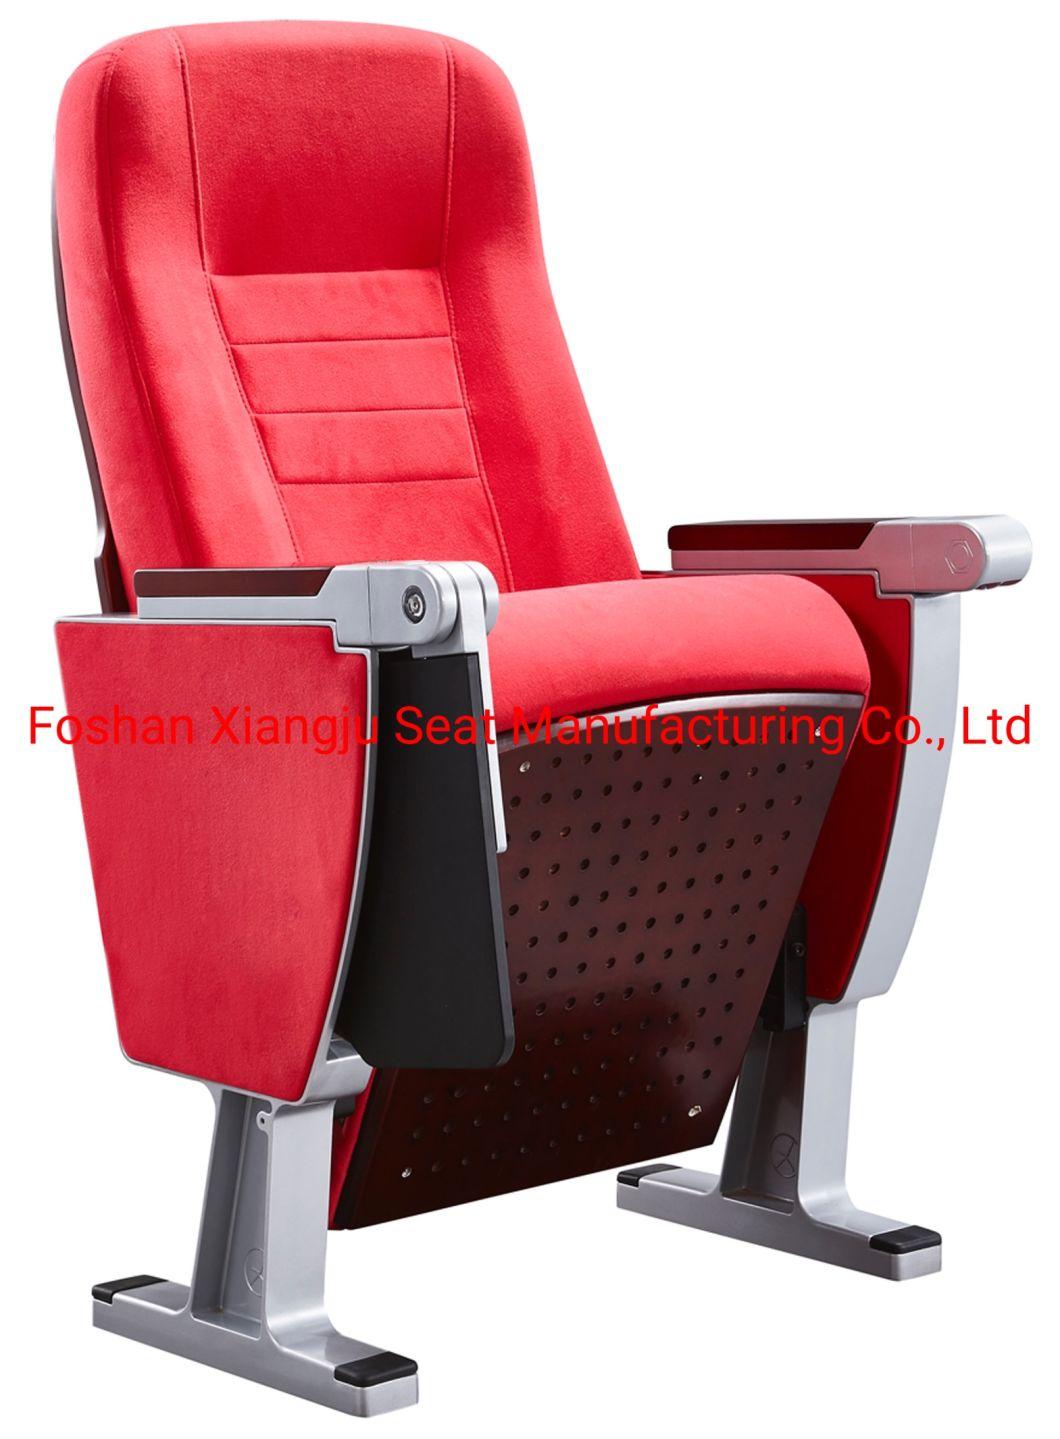 College Lecture Hall Theater Conference Church Cinema Auditorium Movie Chair